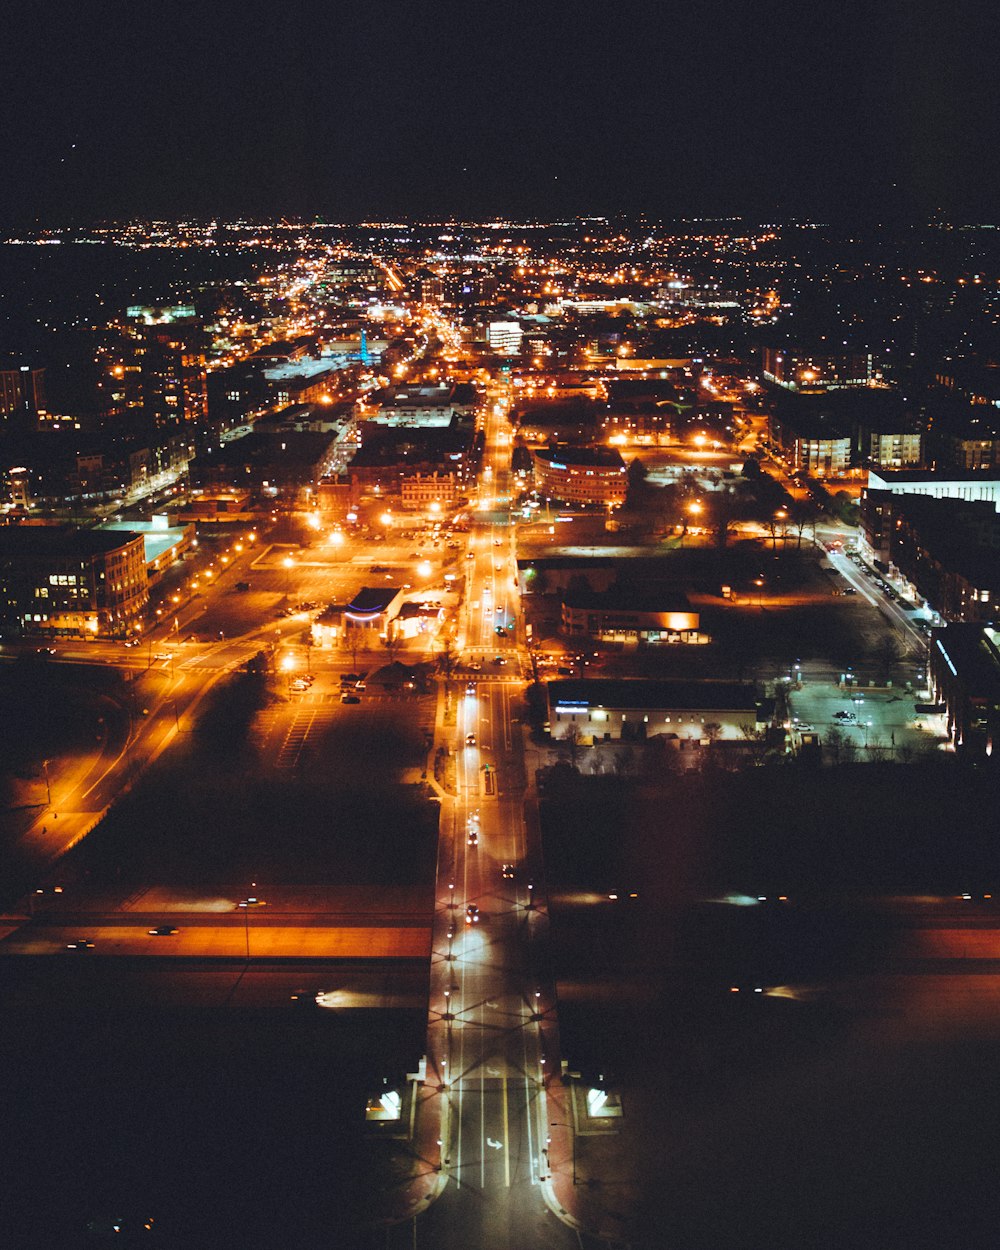 aerial view of road and buildings during nighttime